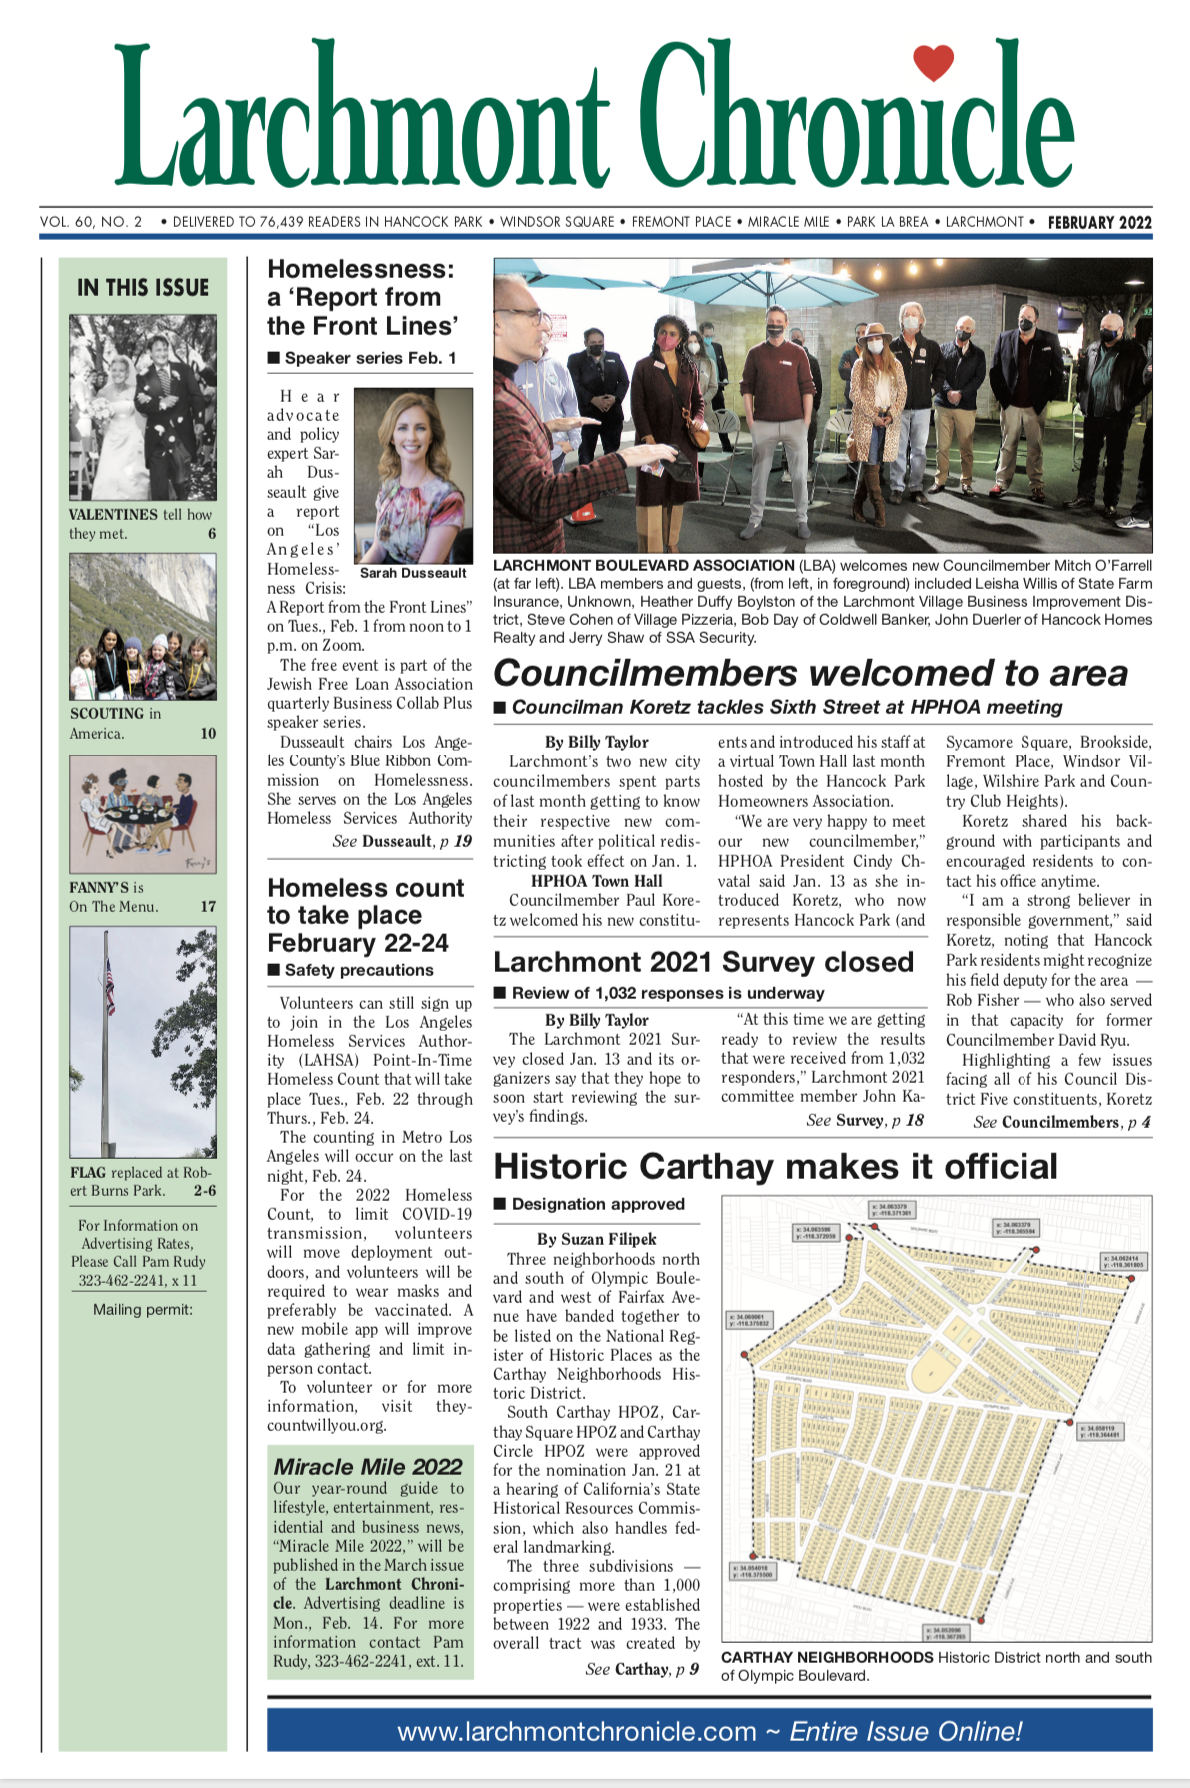 Larchmont Chronicle February 2022 full issue